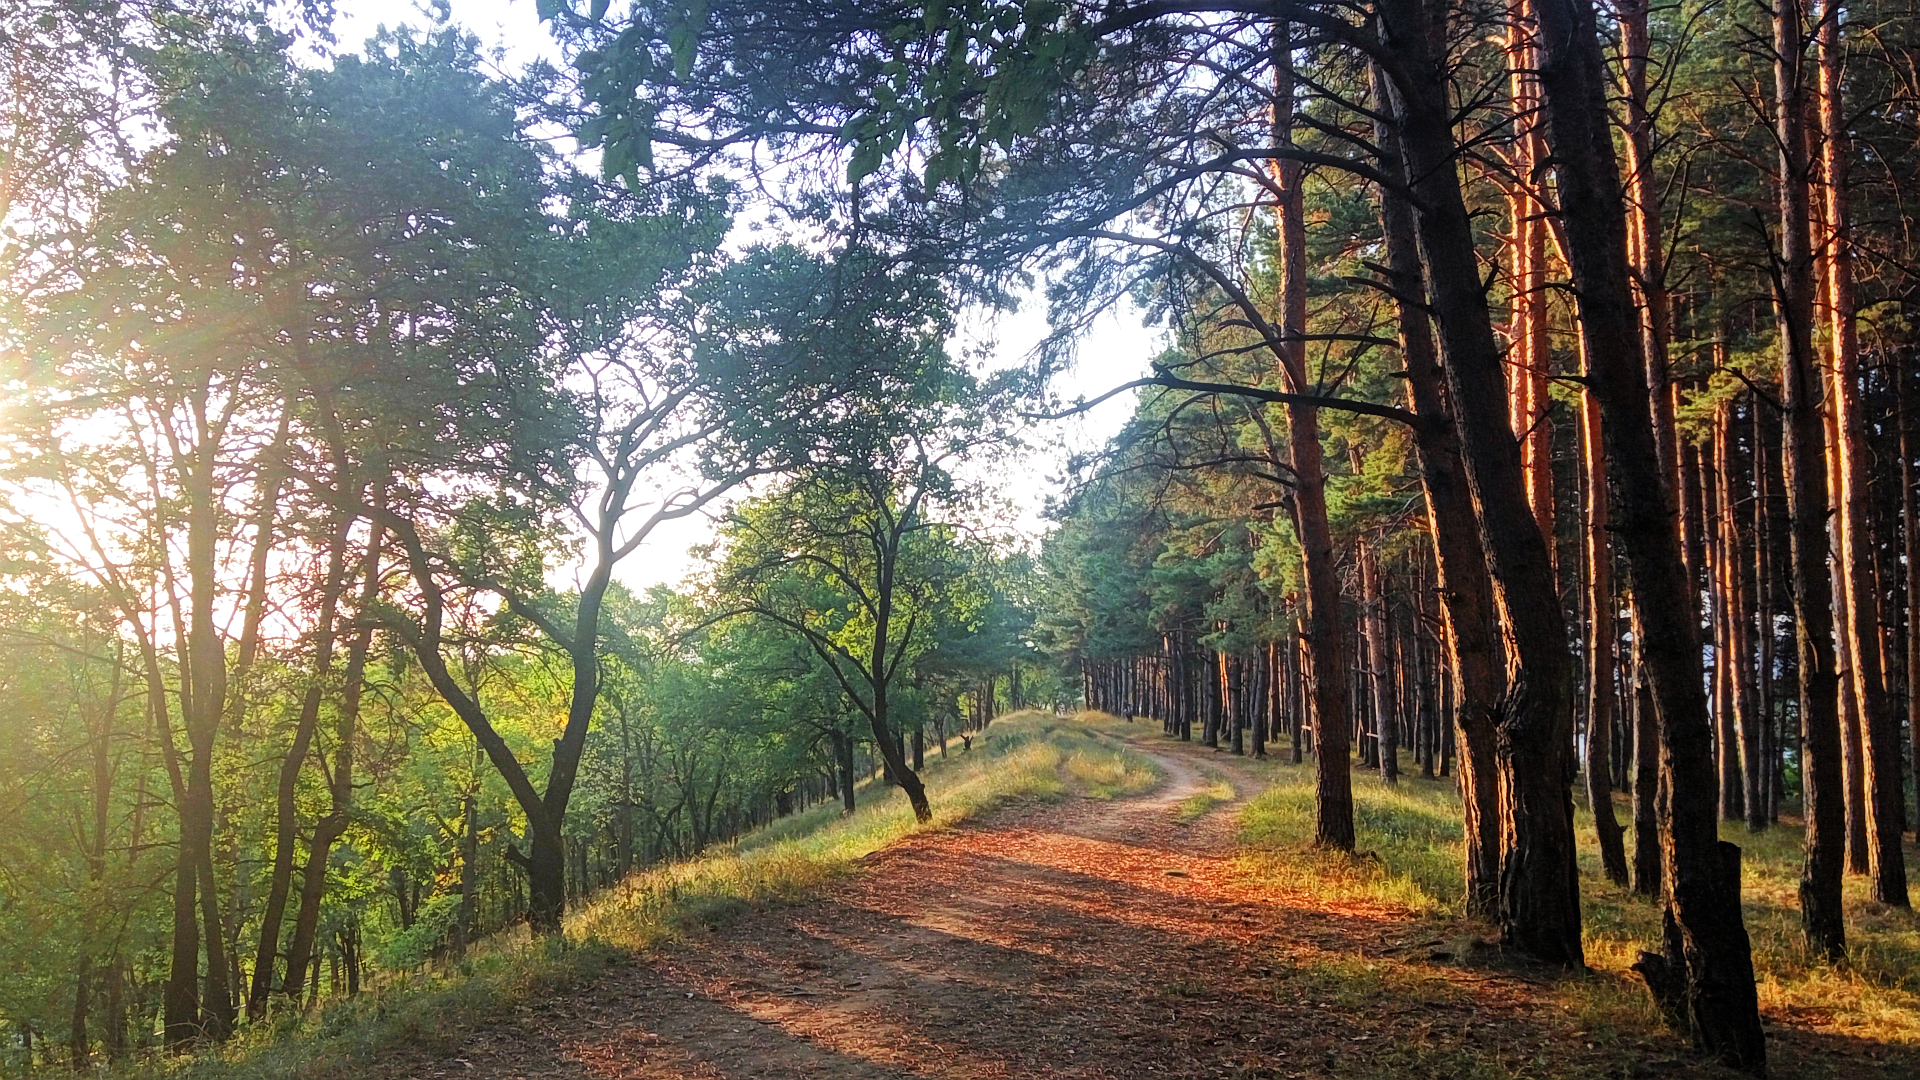 #pine trees, #forest, #nature, #pathway, #landscape